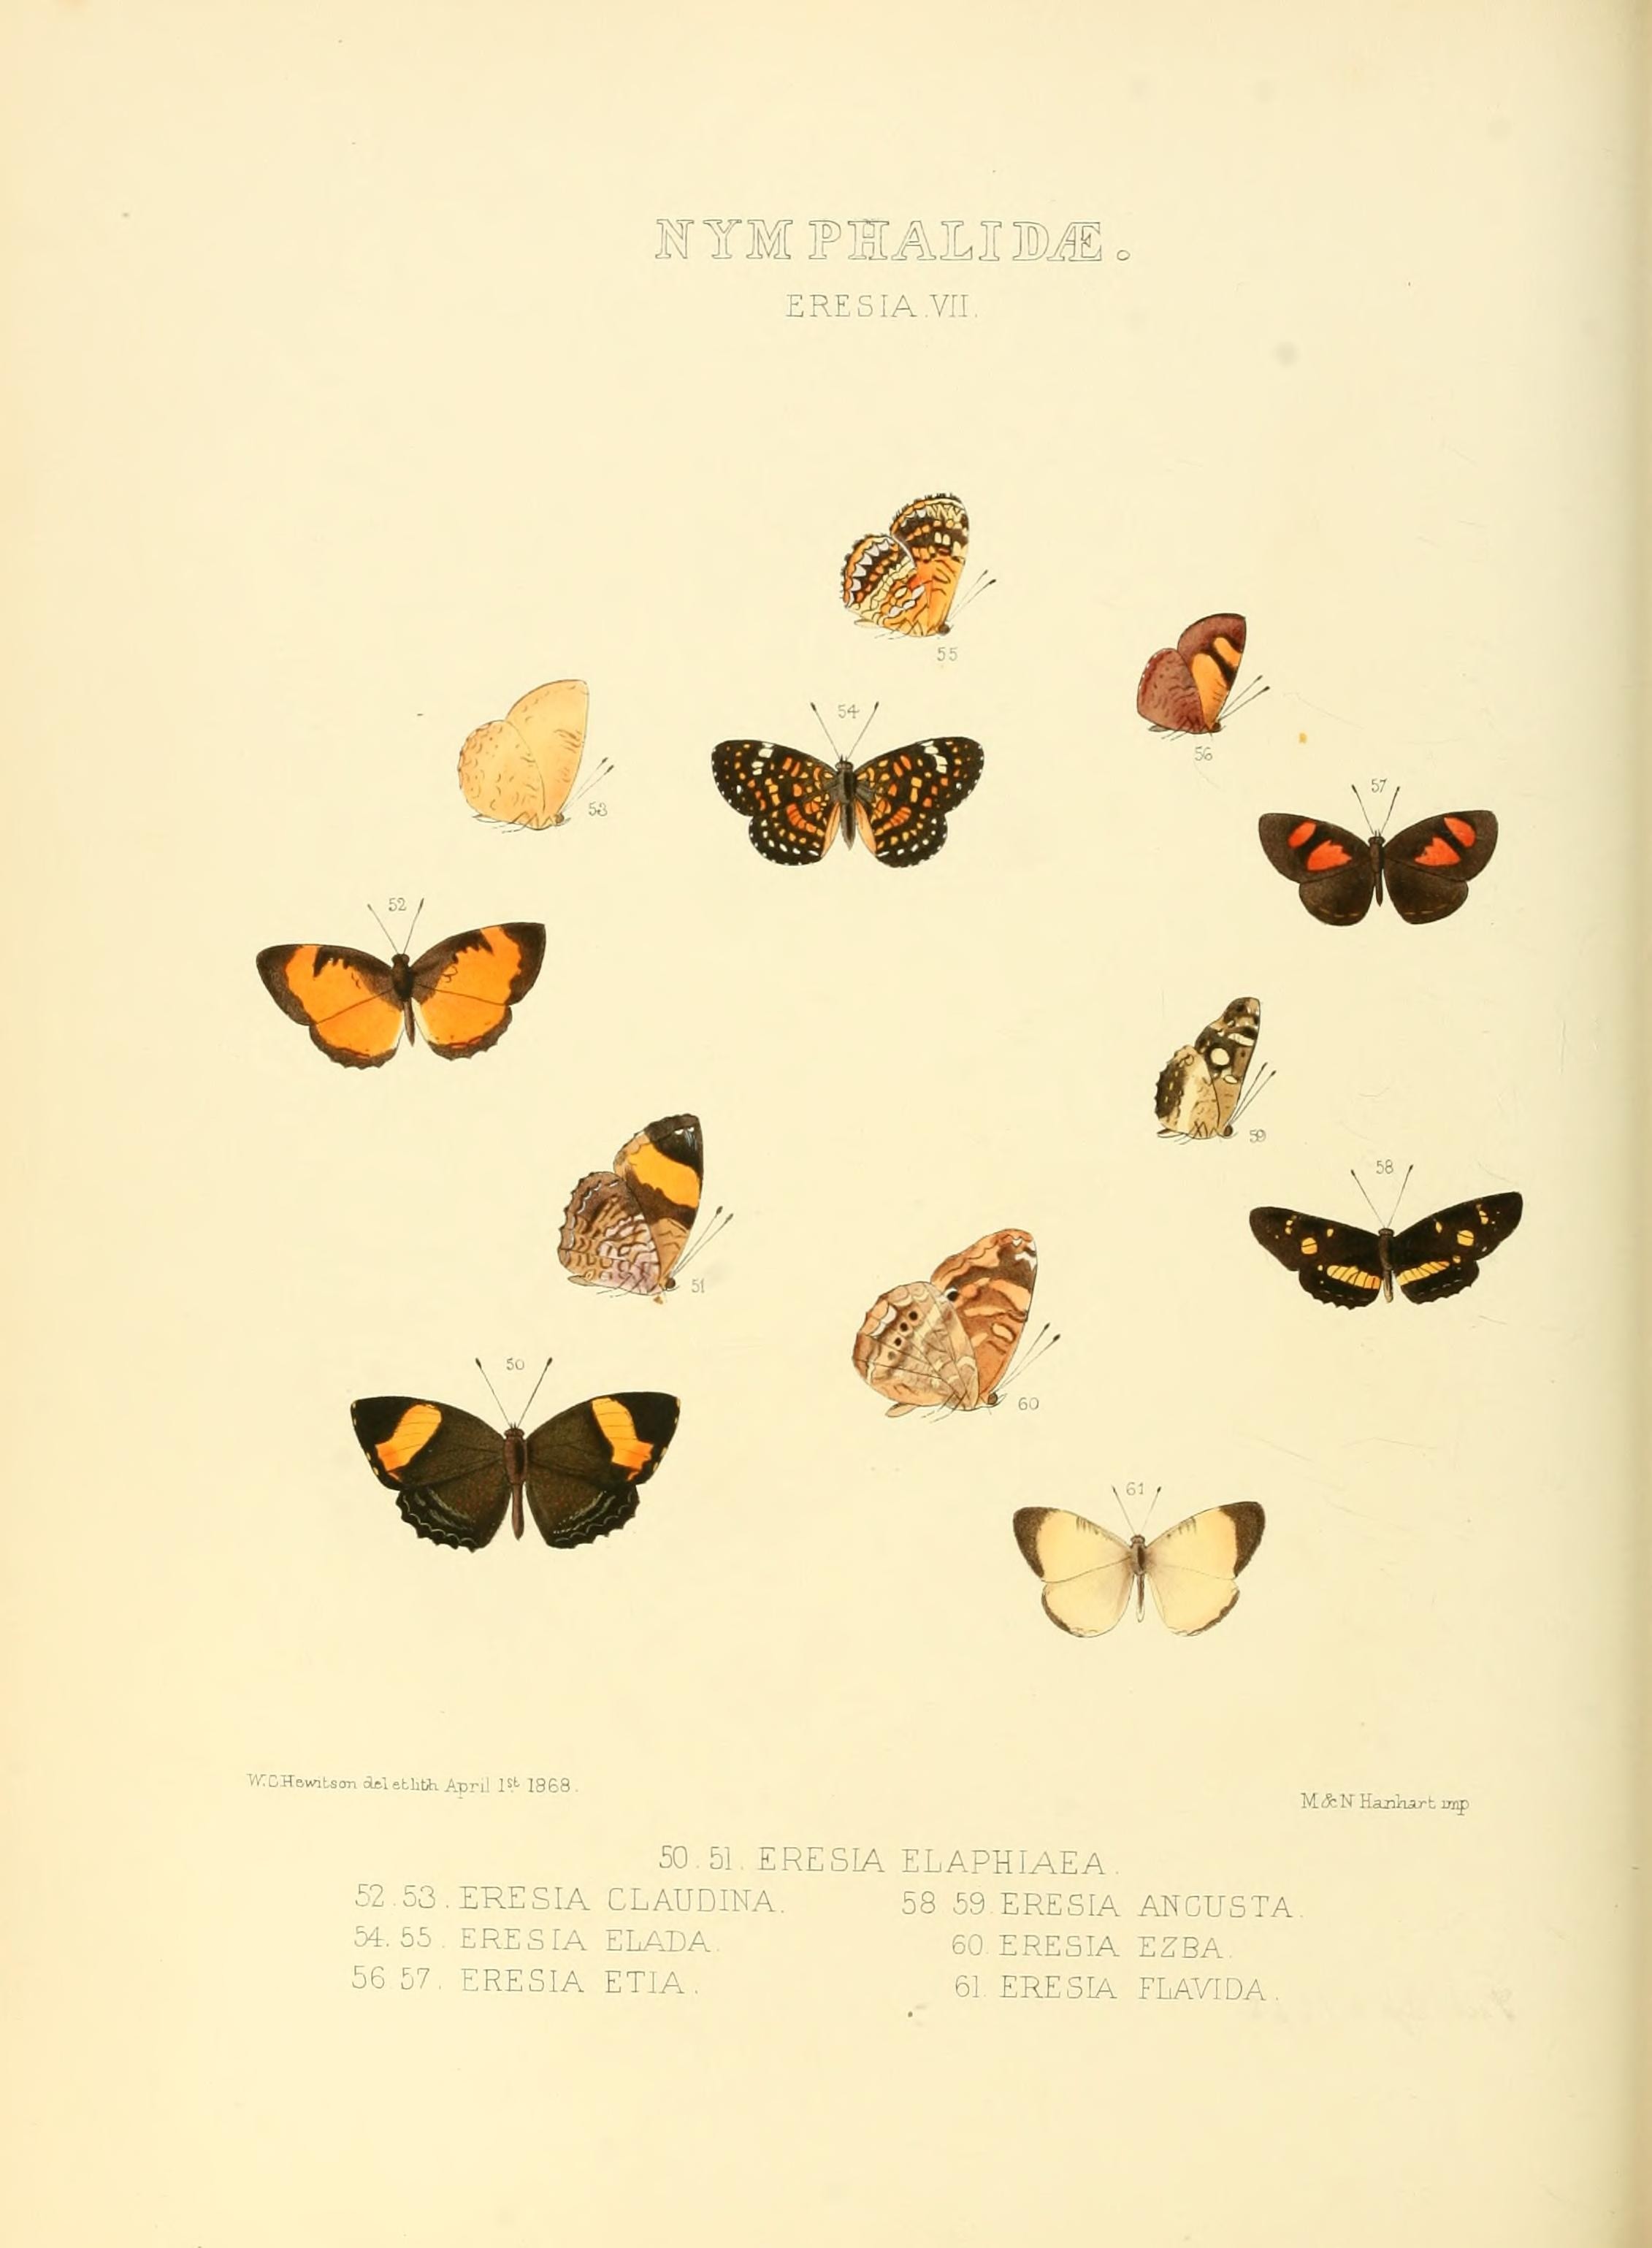 Illustrations of new species of exotic butterflies (Nymphalidae- Eresia VII) (7636765406)